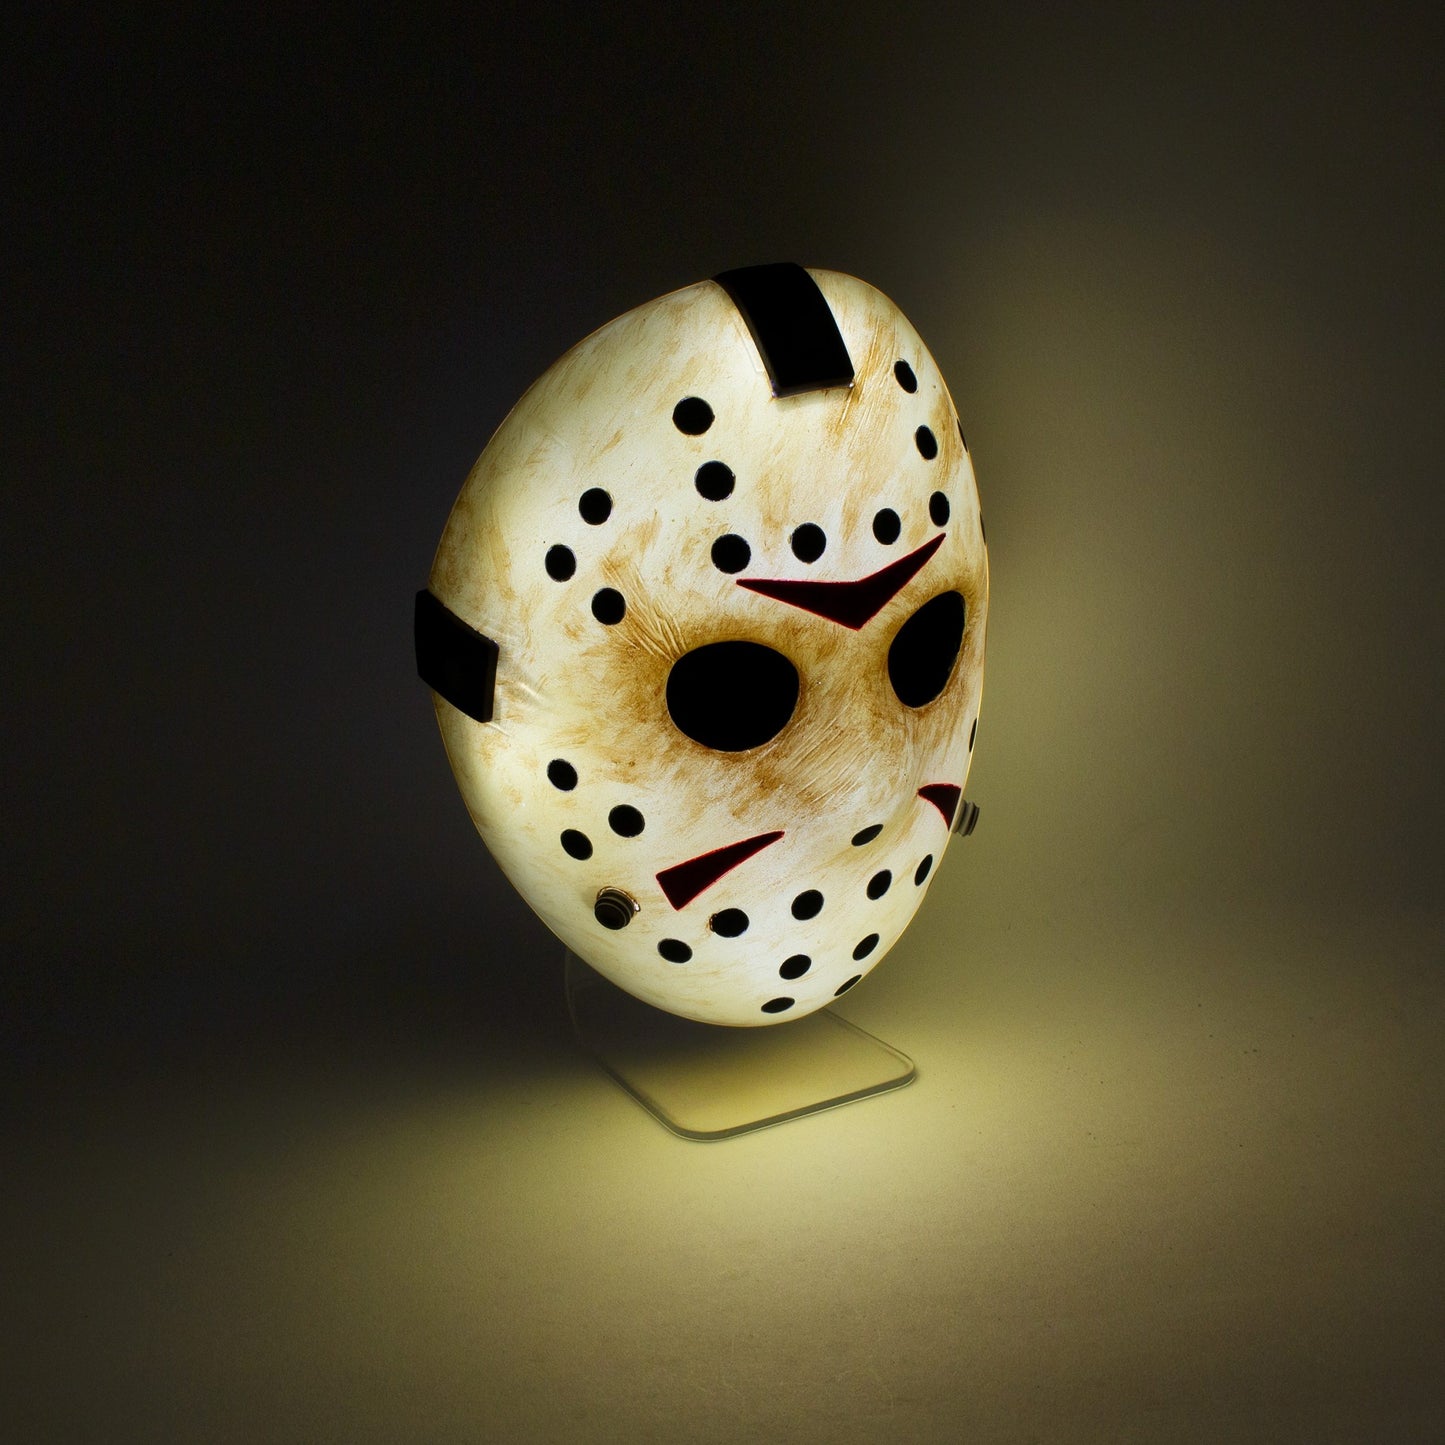 Friday the 13th - Friday the 13th Light